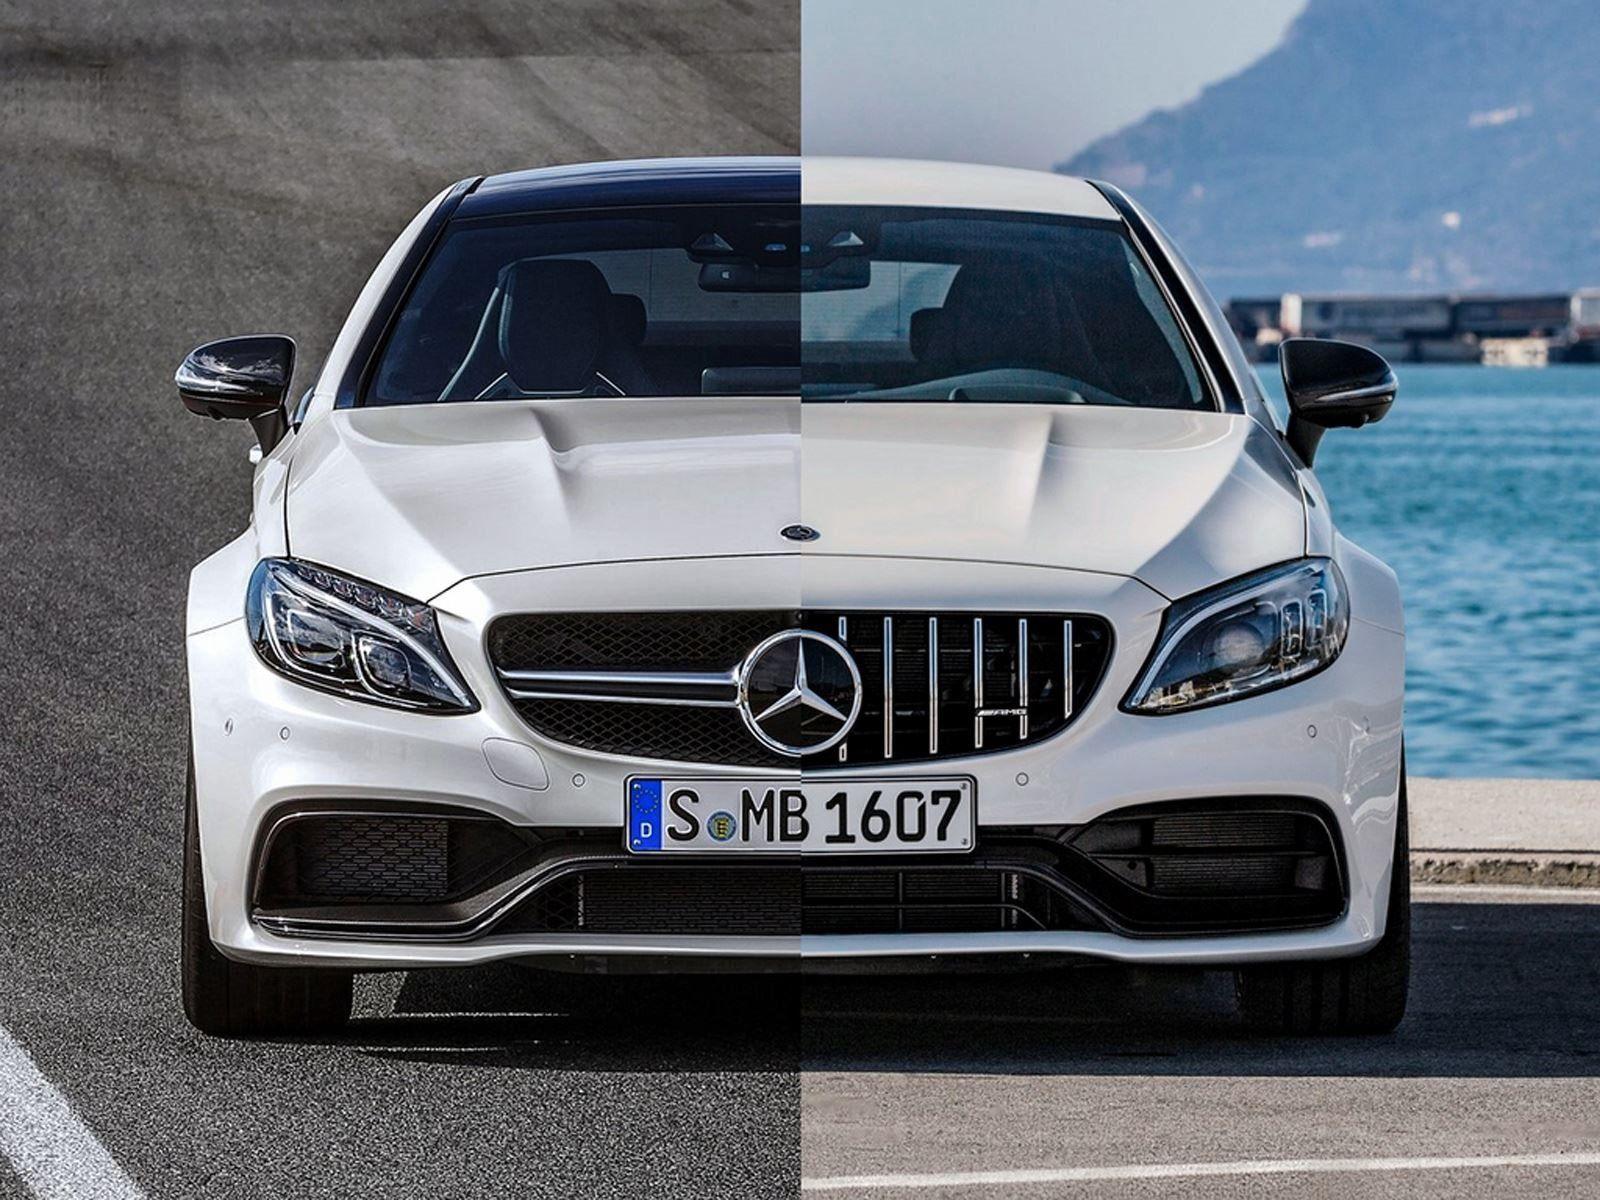 Vs. 2019 Mercedes AMG C63: Here's What's New